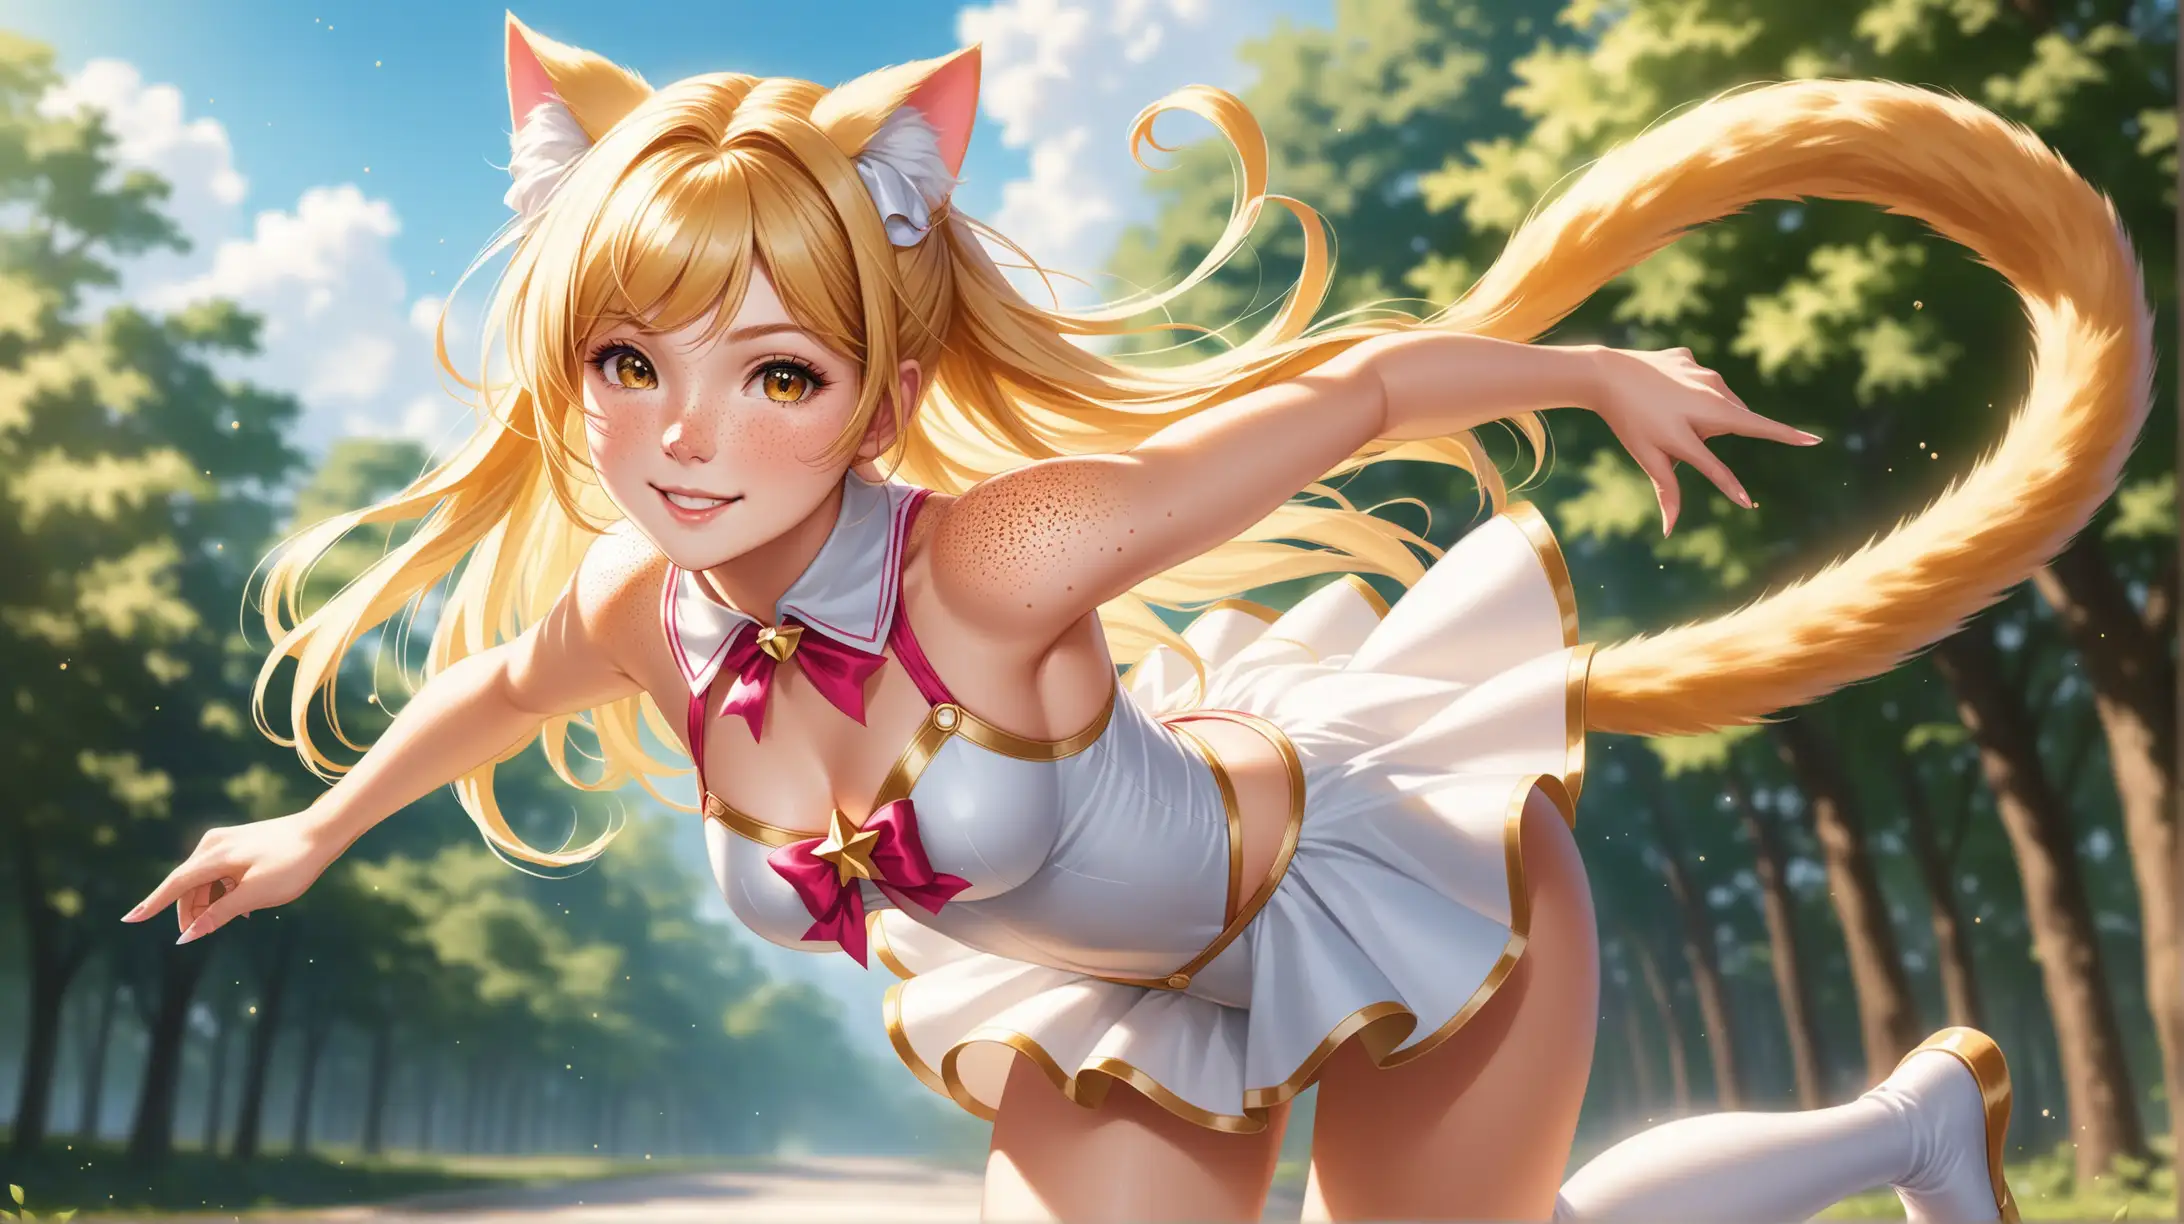 Fantasy Magical Girl with Cat Ears in a Dynamic Outdoor Pose